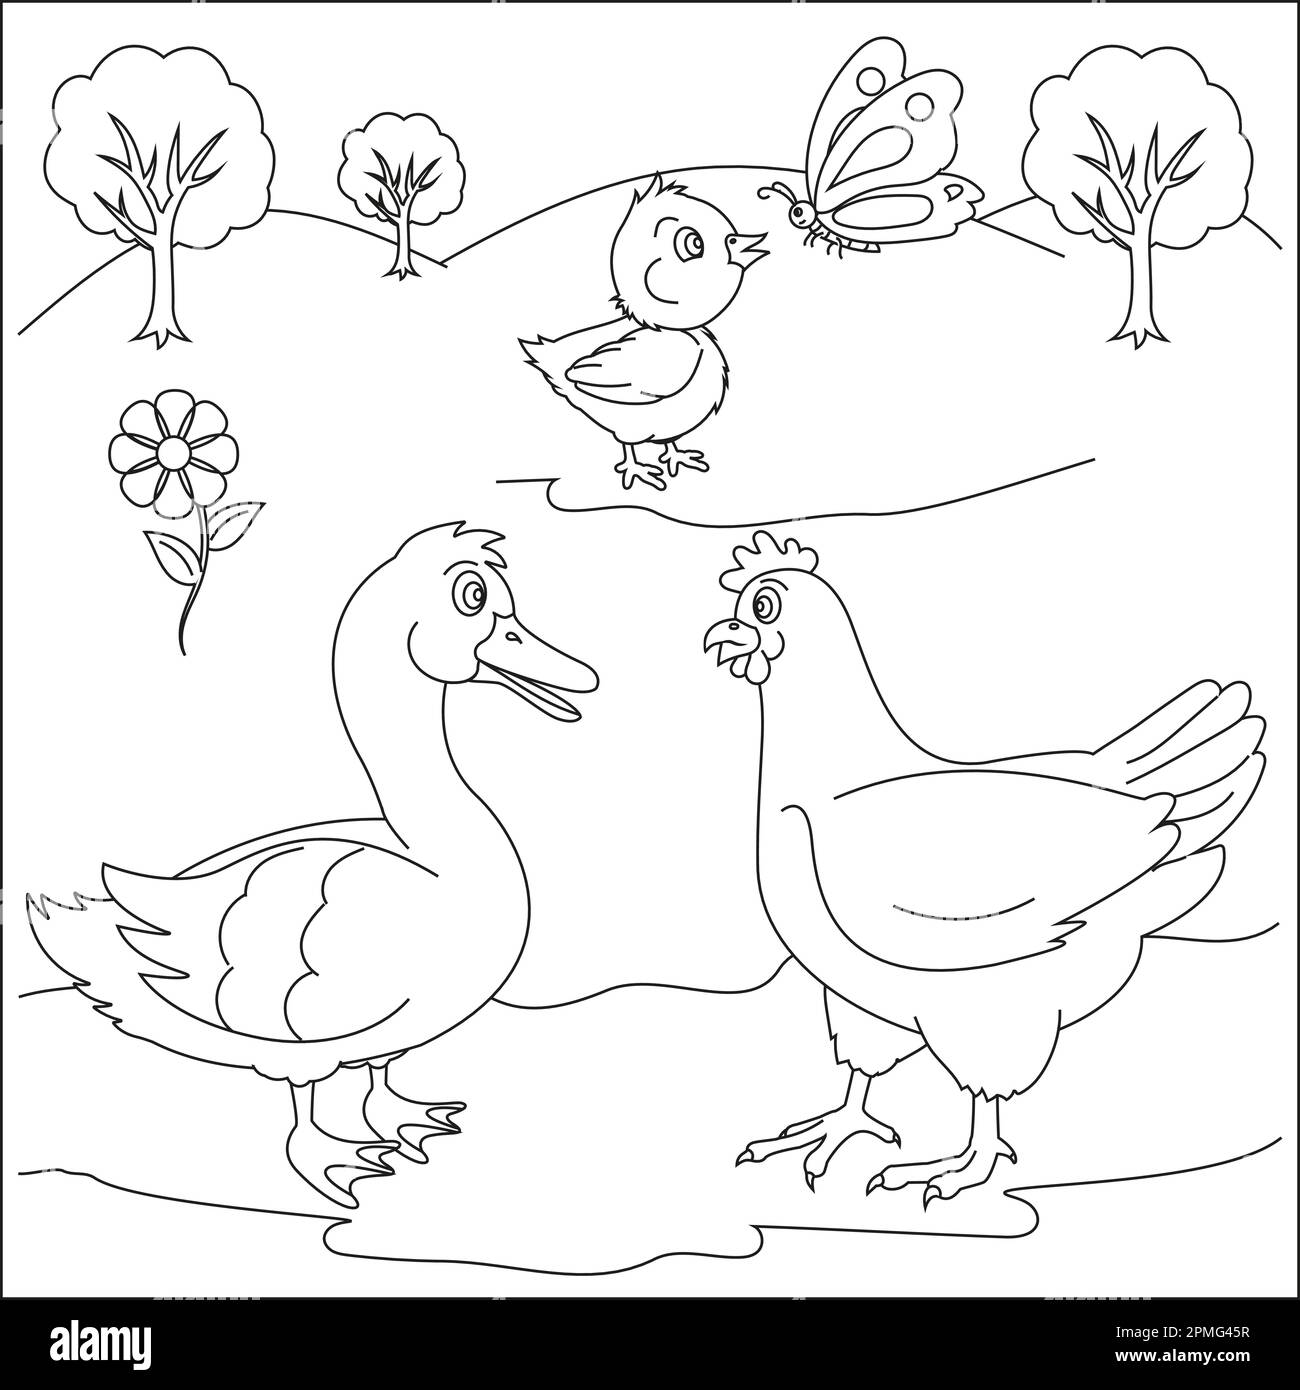 Hen, swan and baby chicken cartoon character coloring page. Coloring book for kids Stock Vector